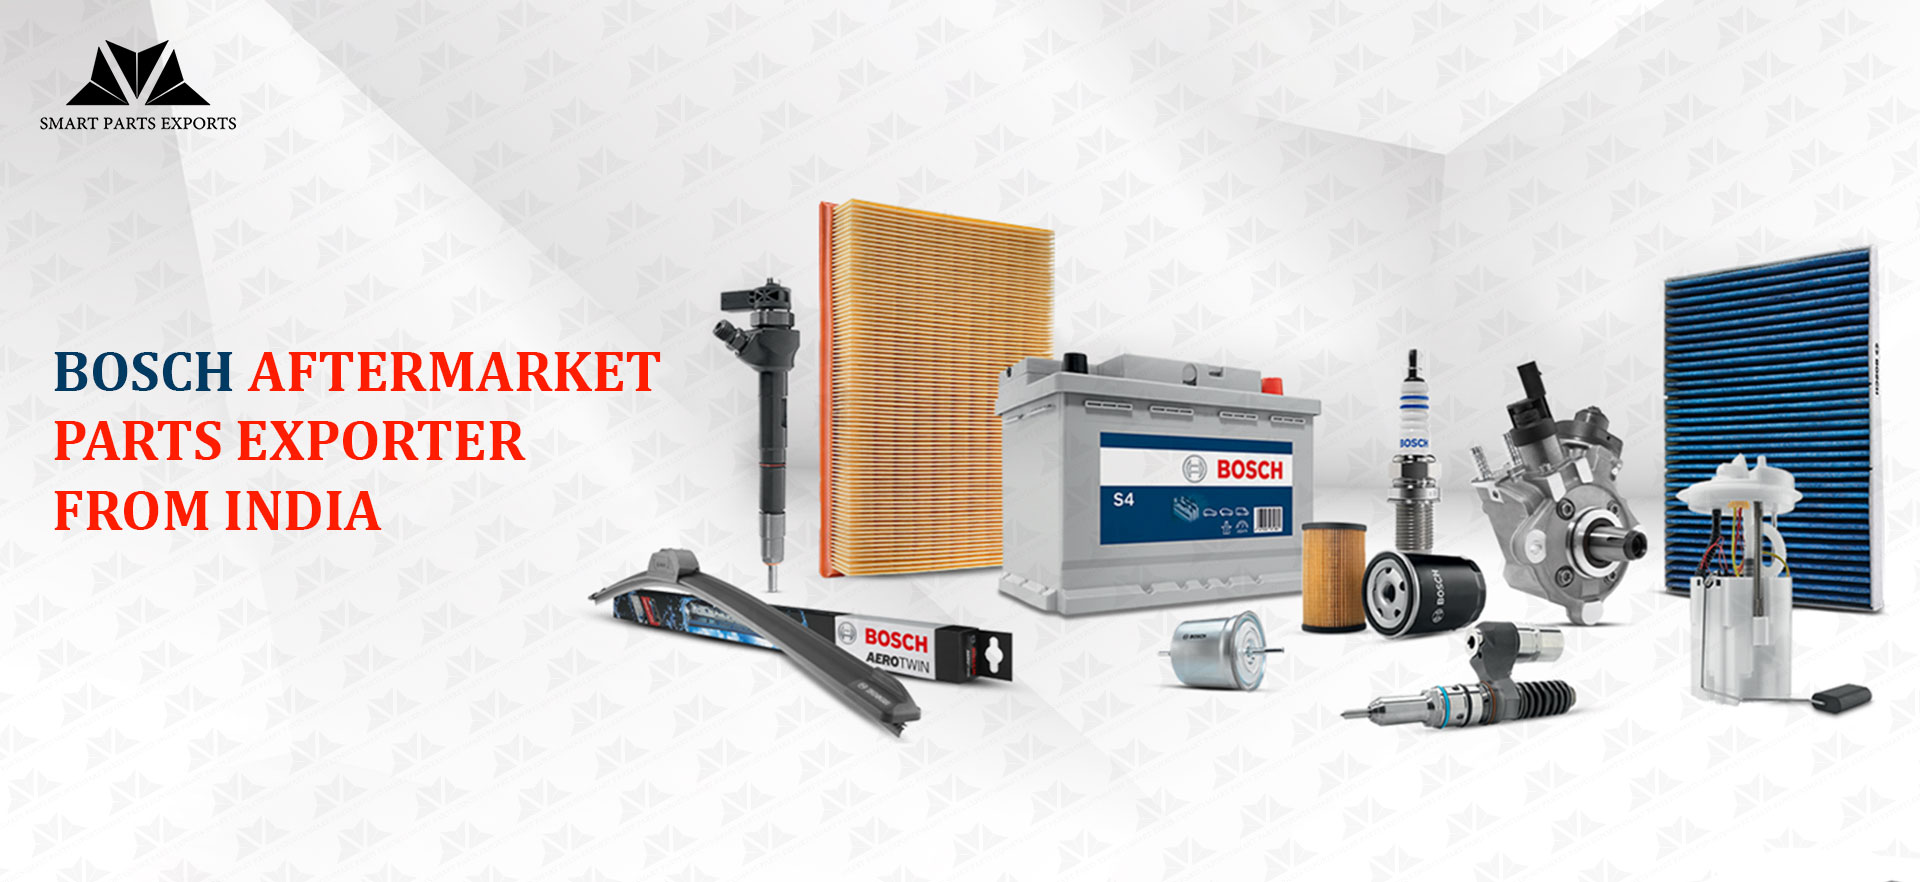 Bosch Aftermarket Parts Exporter from India